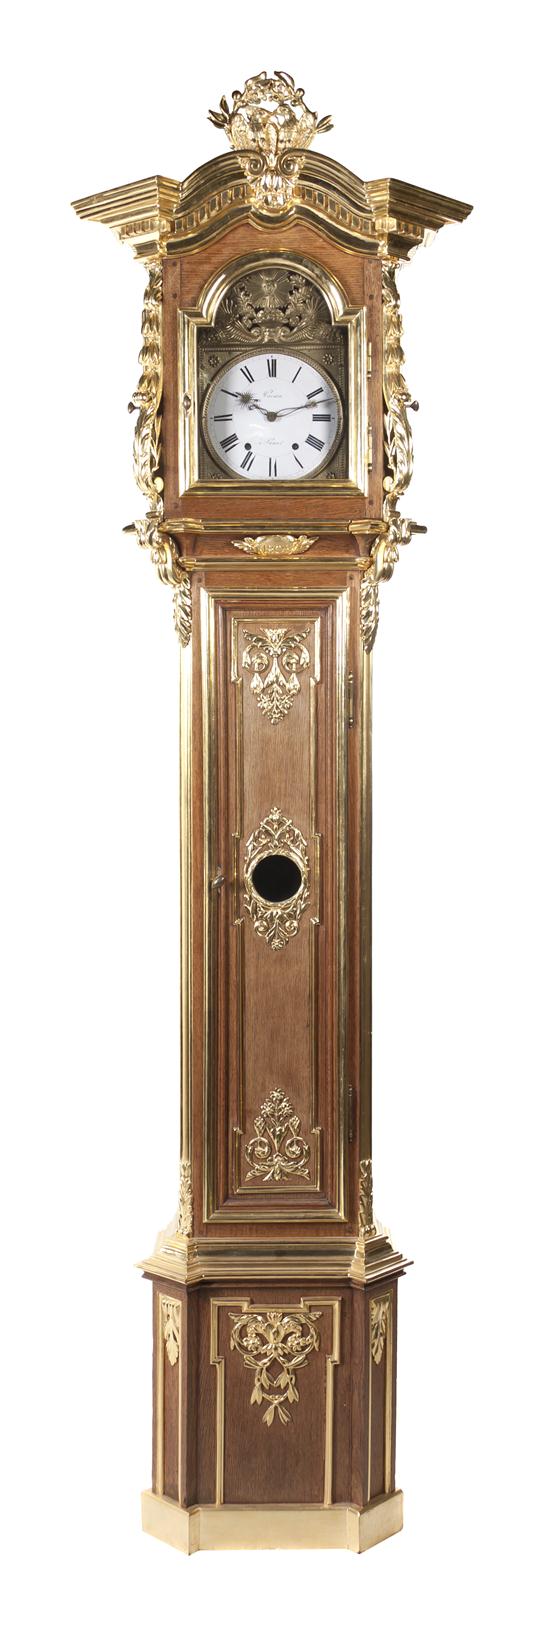 A French Oak and Parcel Gilt Tall 155c67